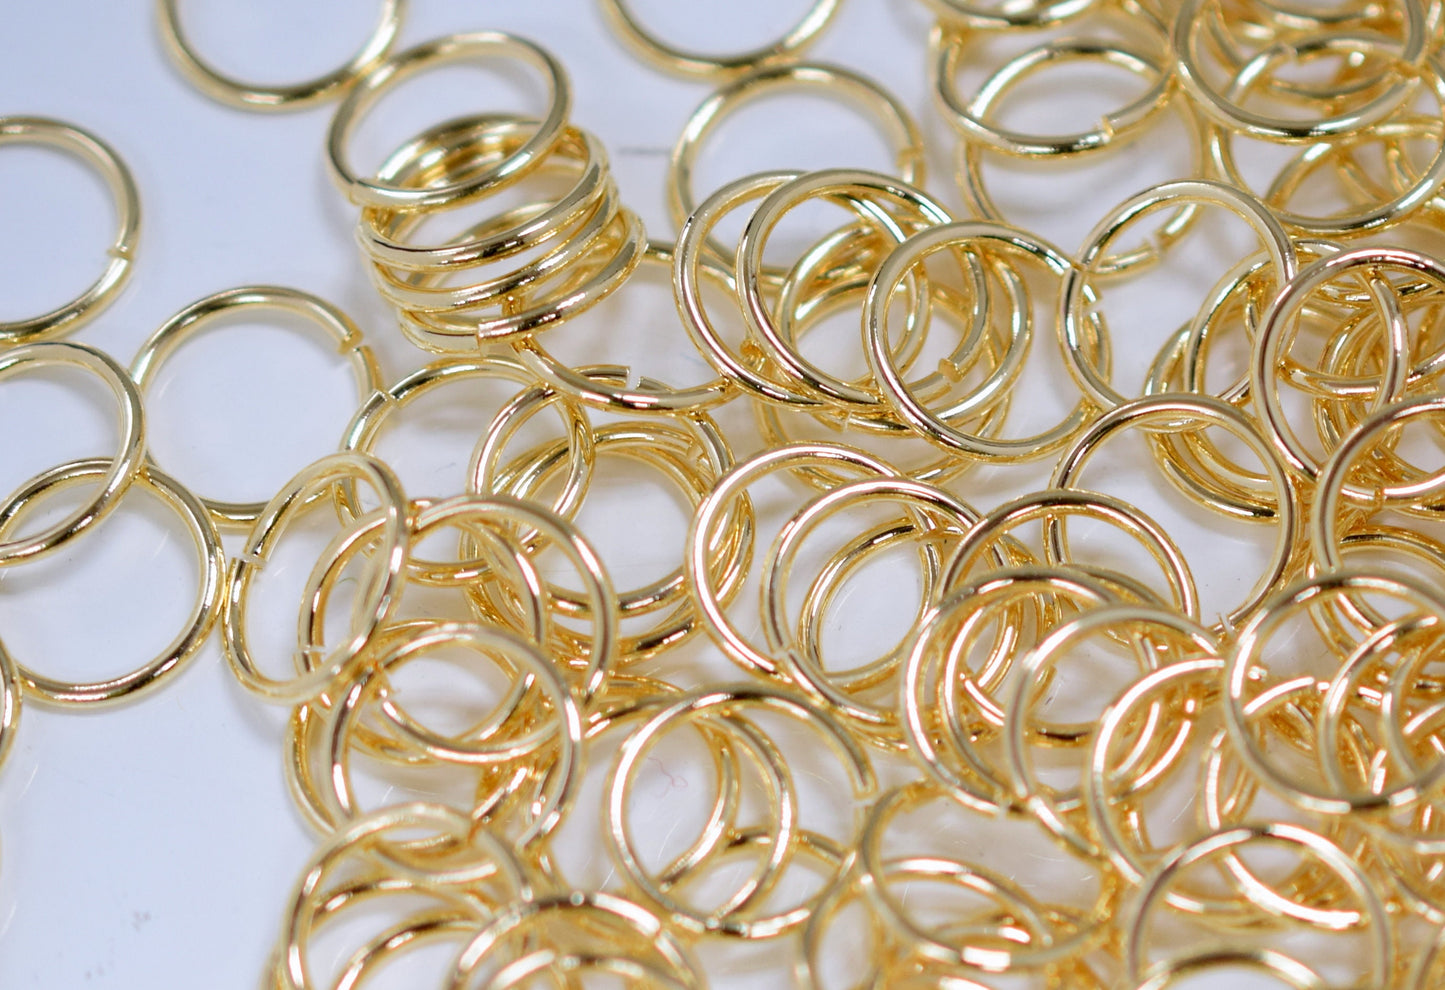 14K Gold Filled EP Open Jump Ring 3mm,4mm,5mm,6mm,8mm,10mm,12mm Gold Filled Findings For Jewelry Making and Wholesale